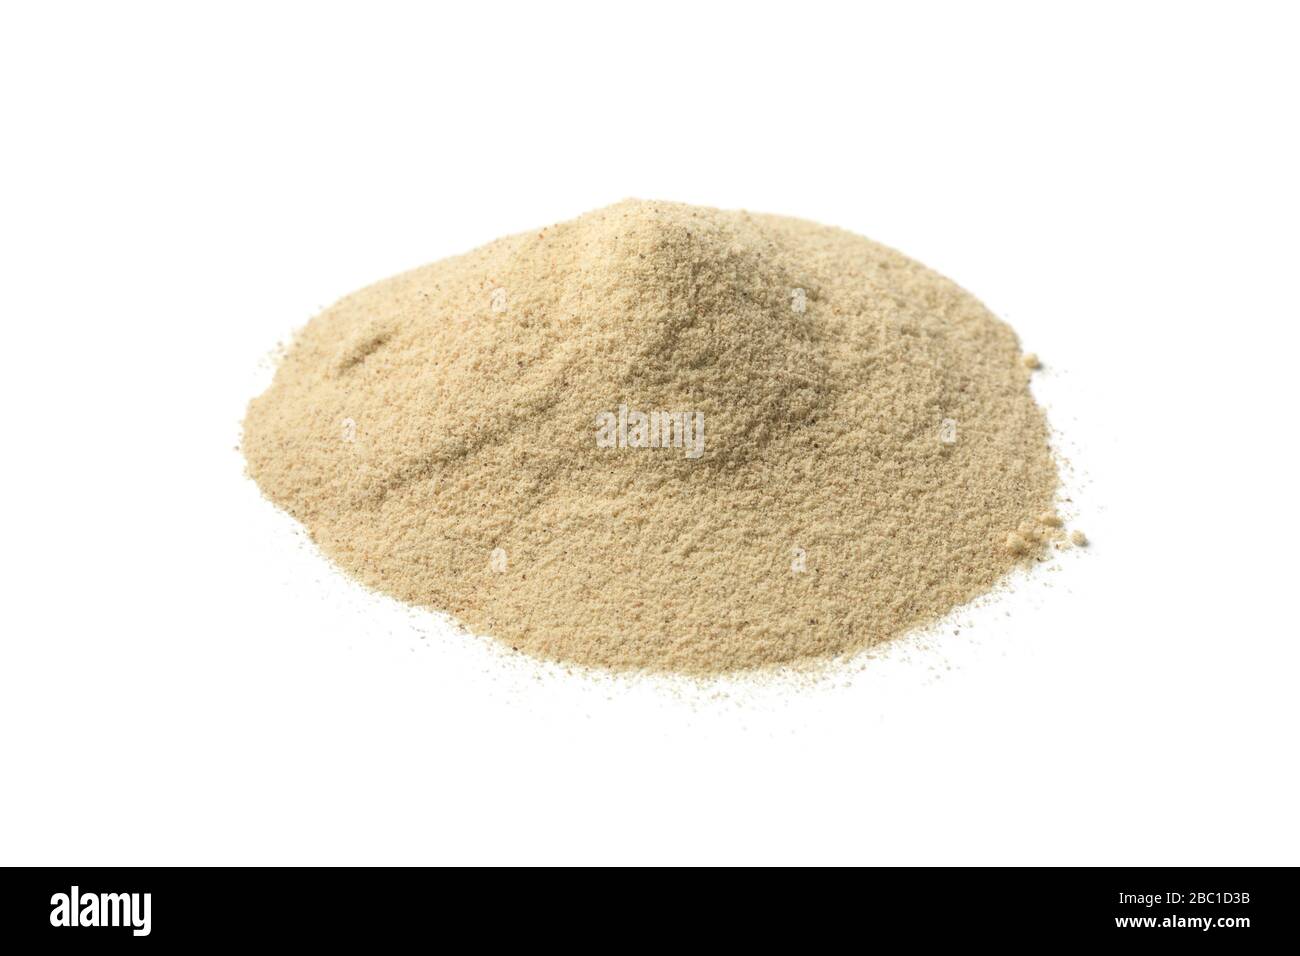 Heap of ground white pepper isolated on white background Stock Photo